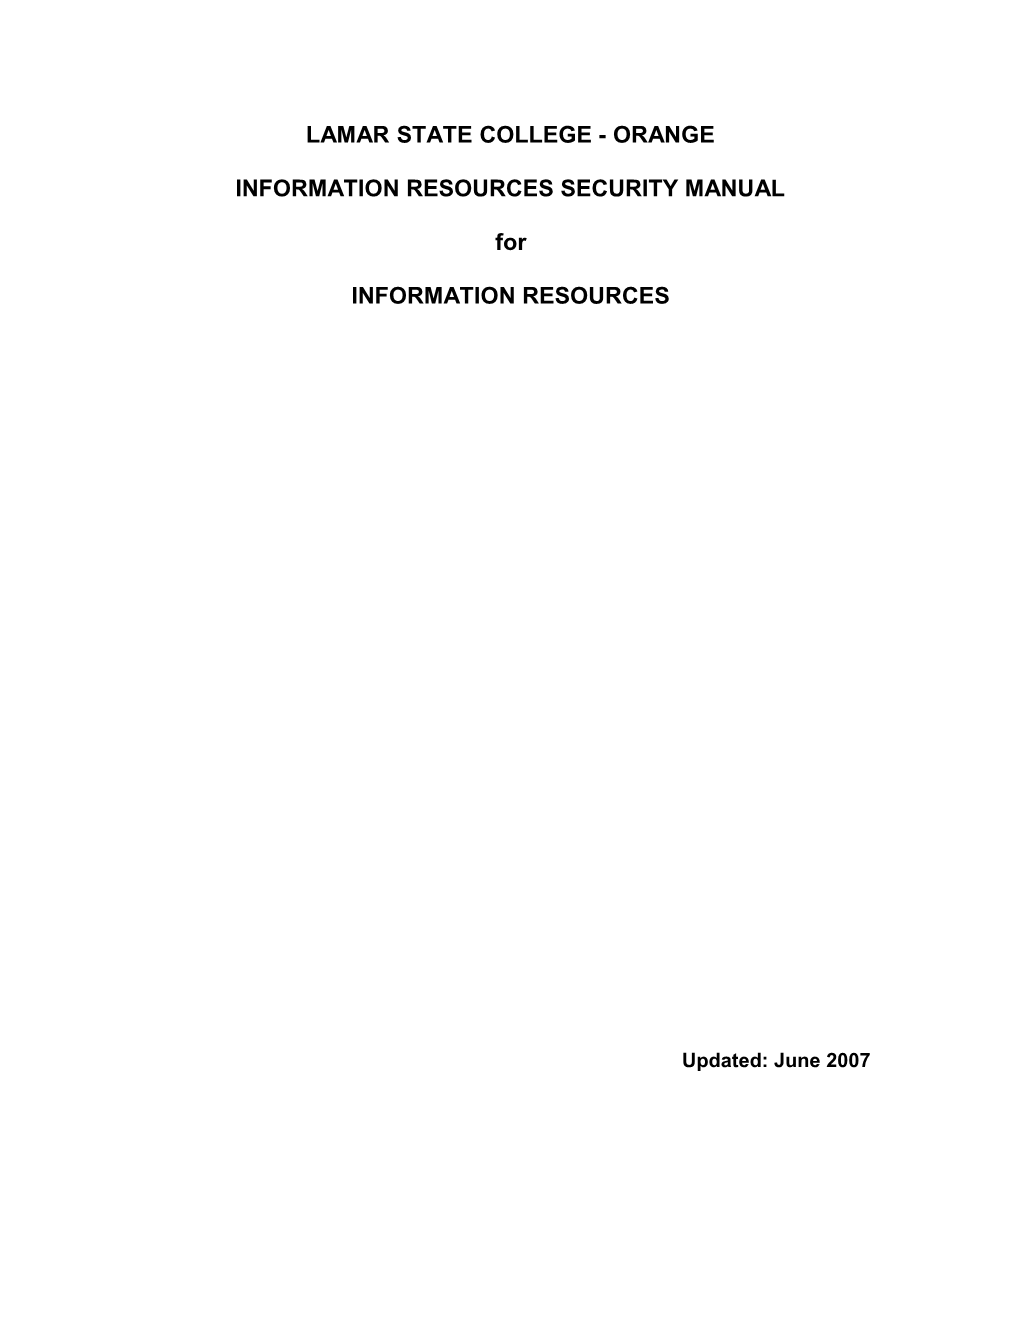 Information Resources Security Manual